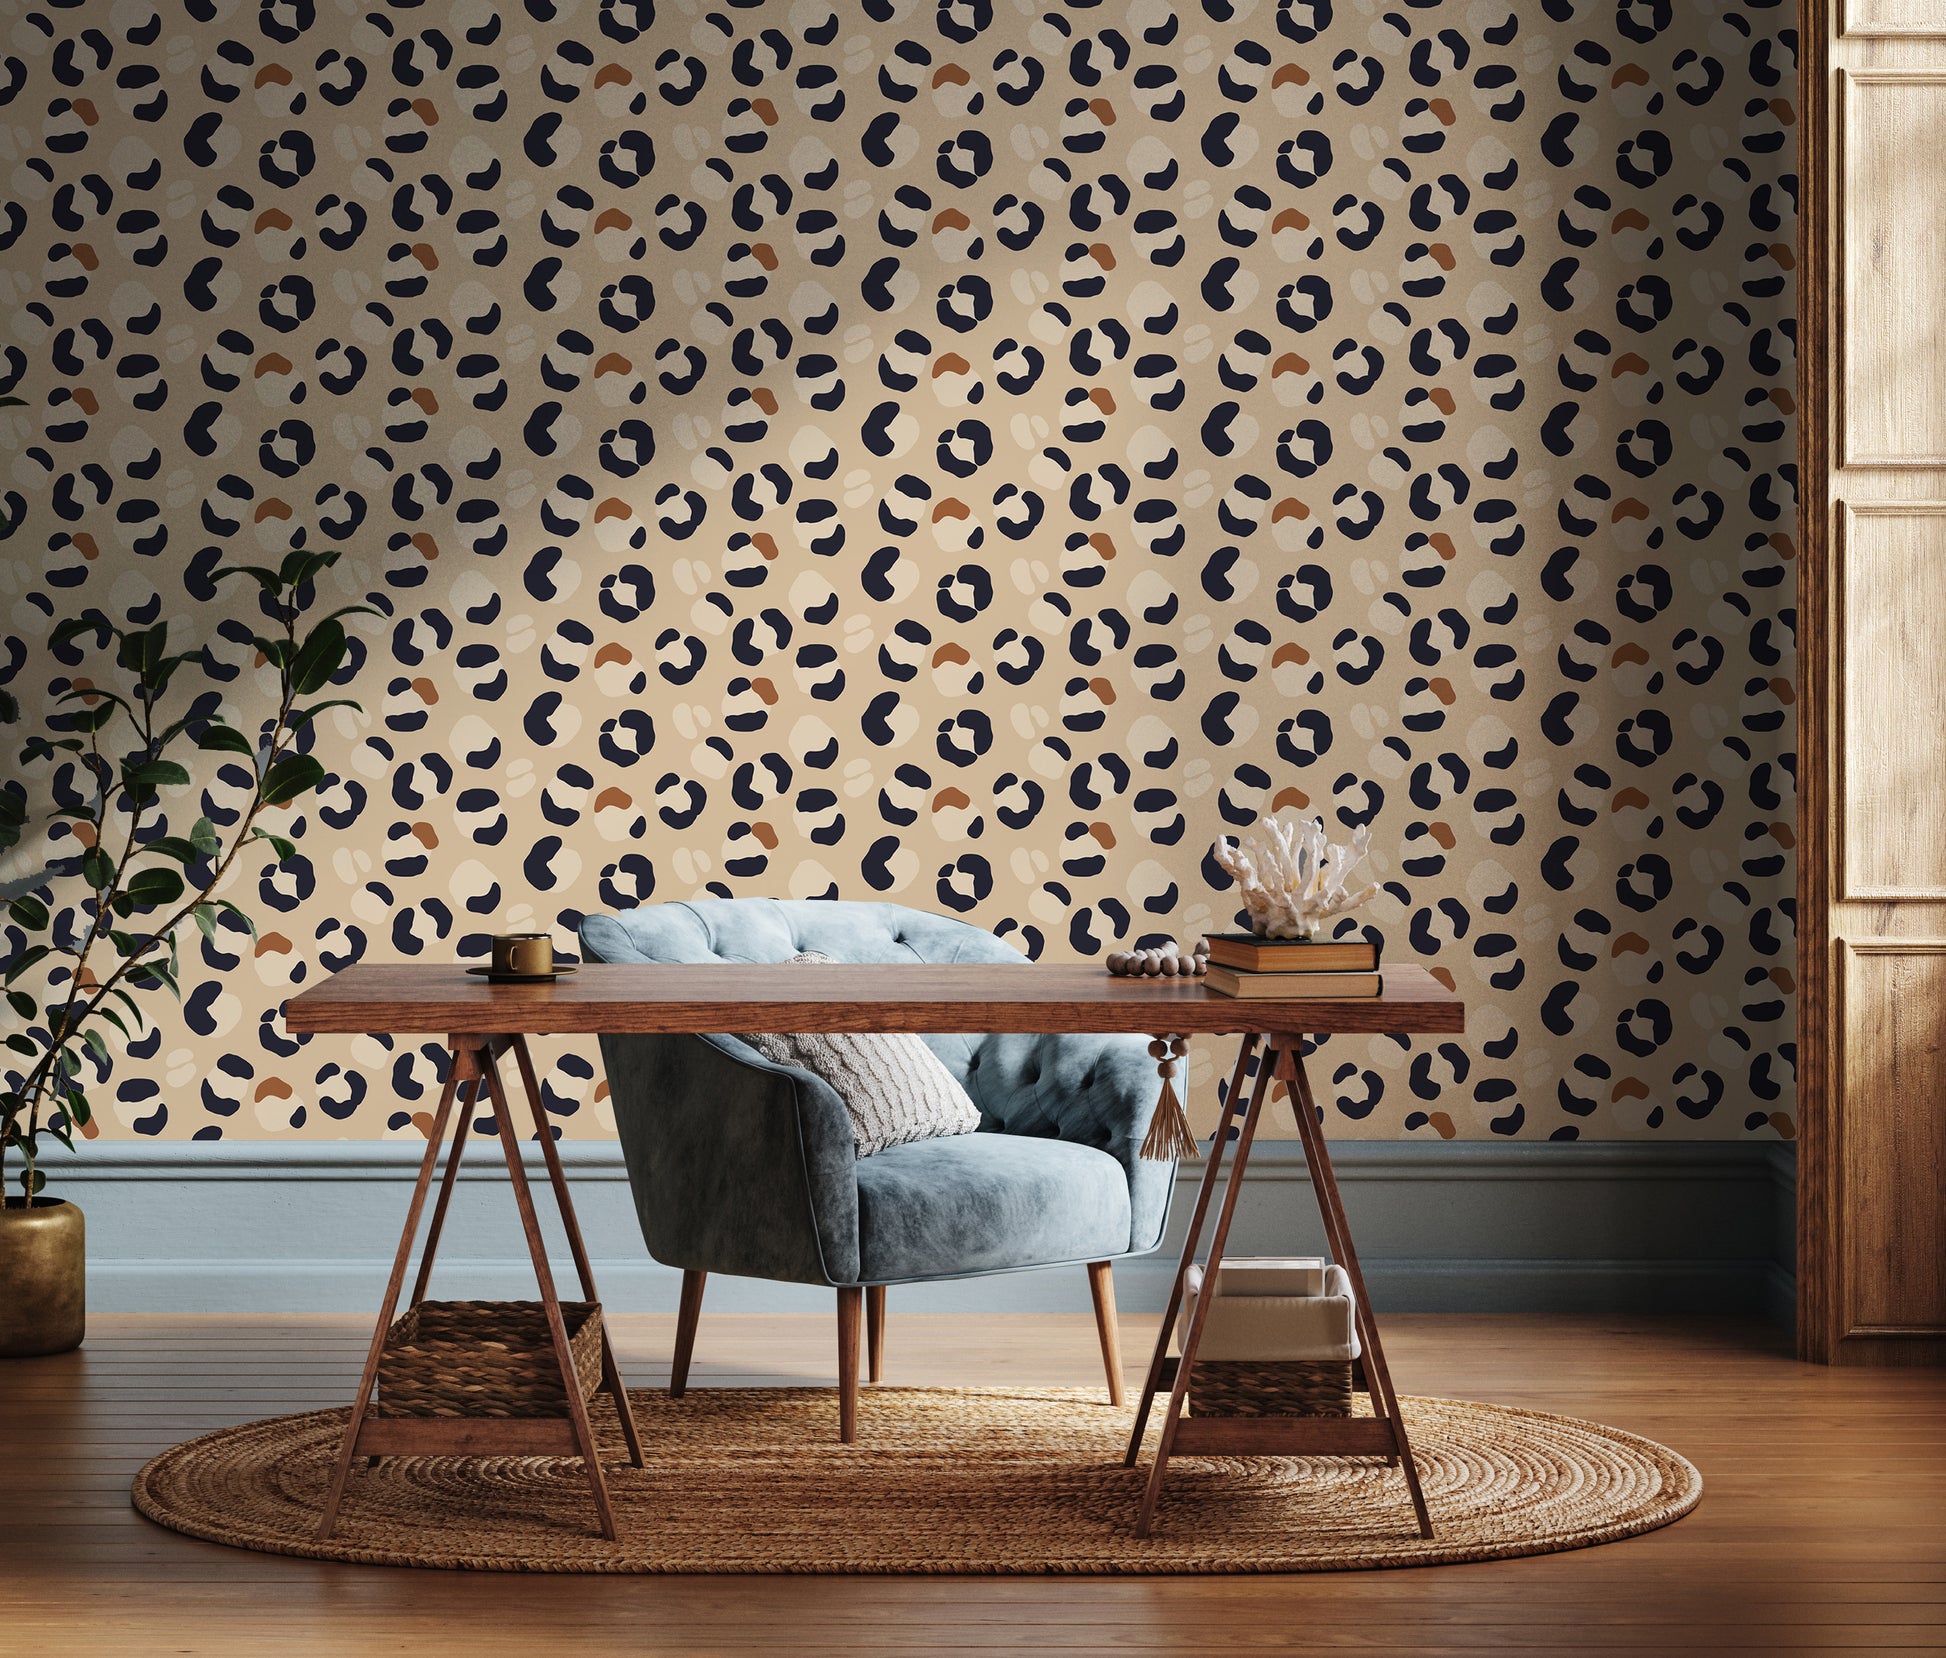 Leopard print wallpaper in a home office